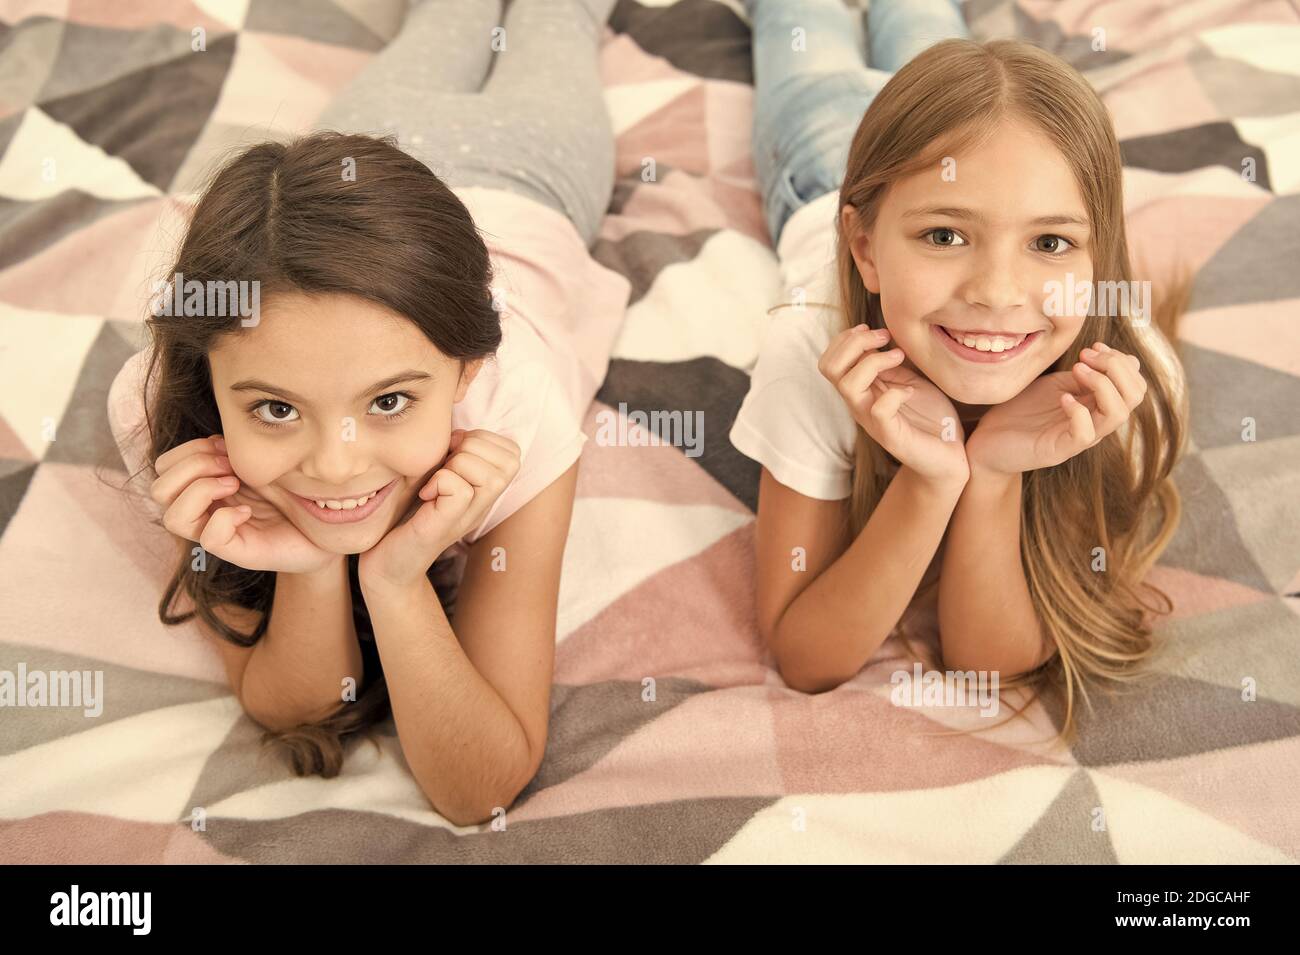 There are many reasons to be happy. Happy kids with cute smiles. Small children relax on bed. Enjoying happy childhood. Childhood happiness. Leisure and rest time. Naptime. Carefree and happy. Stock Photo